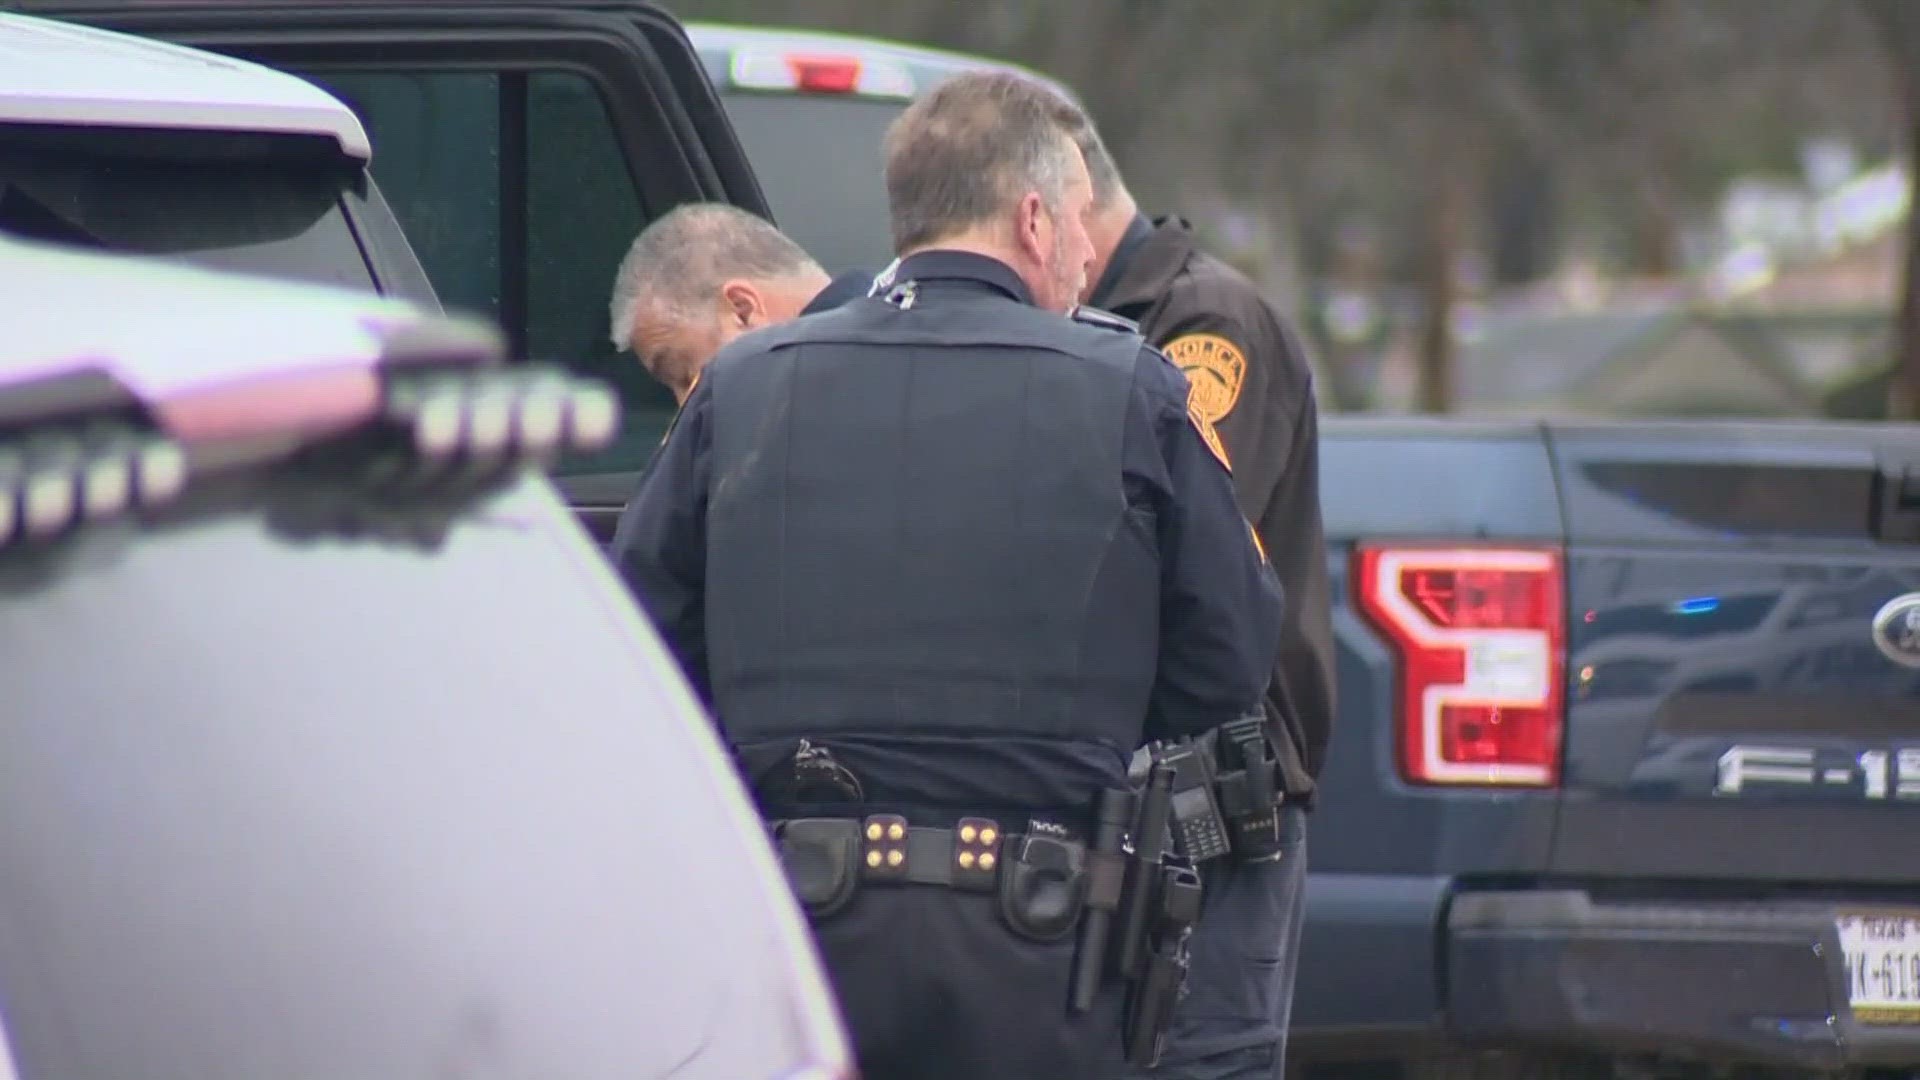 East Central ISD officials say the man was unarmed and no one was hurt.